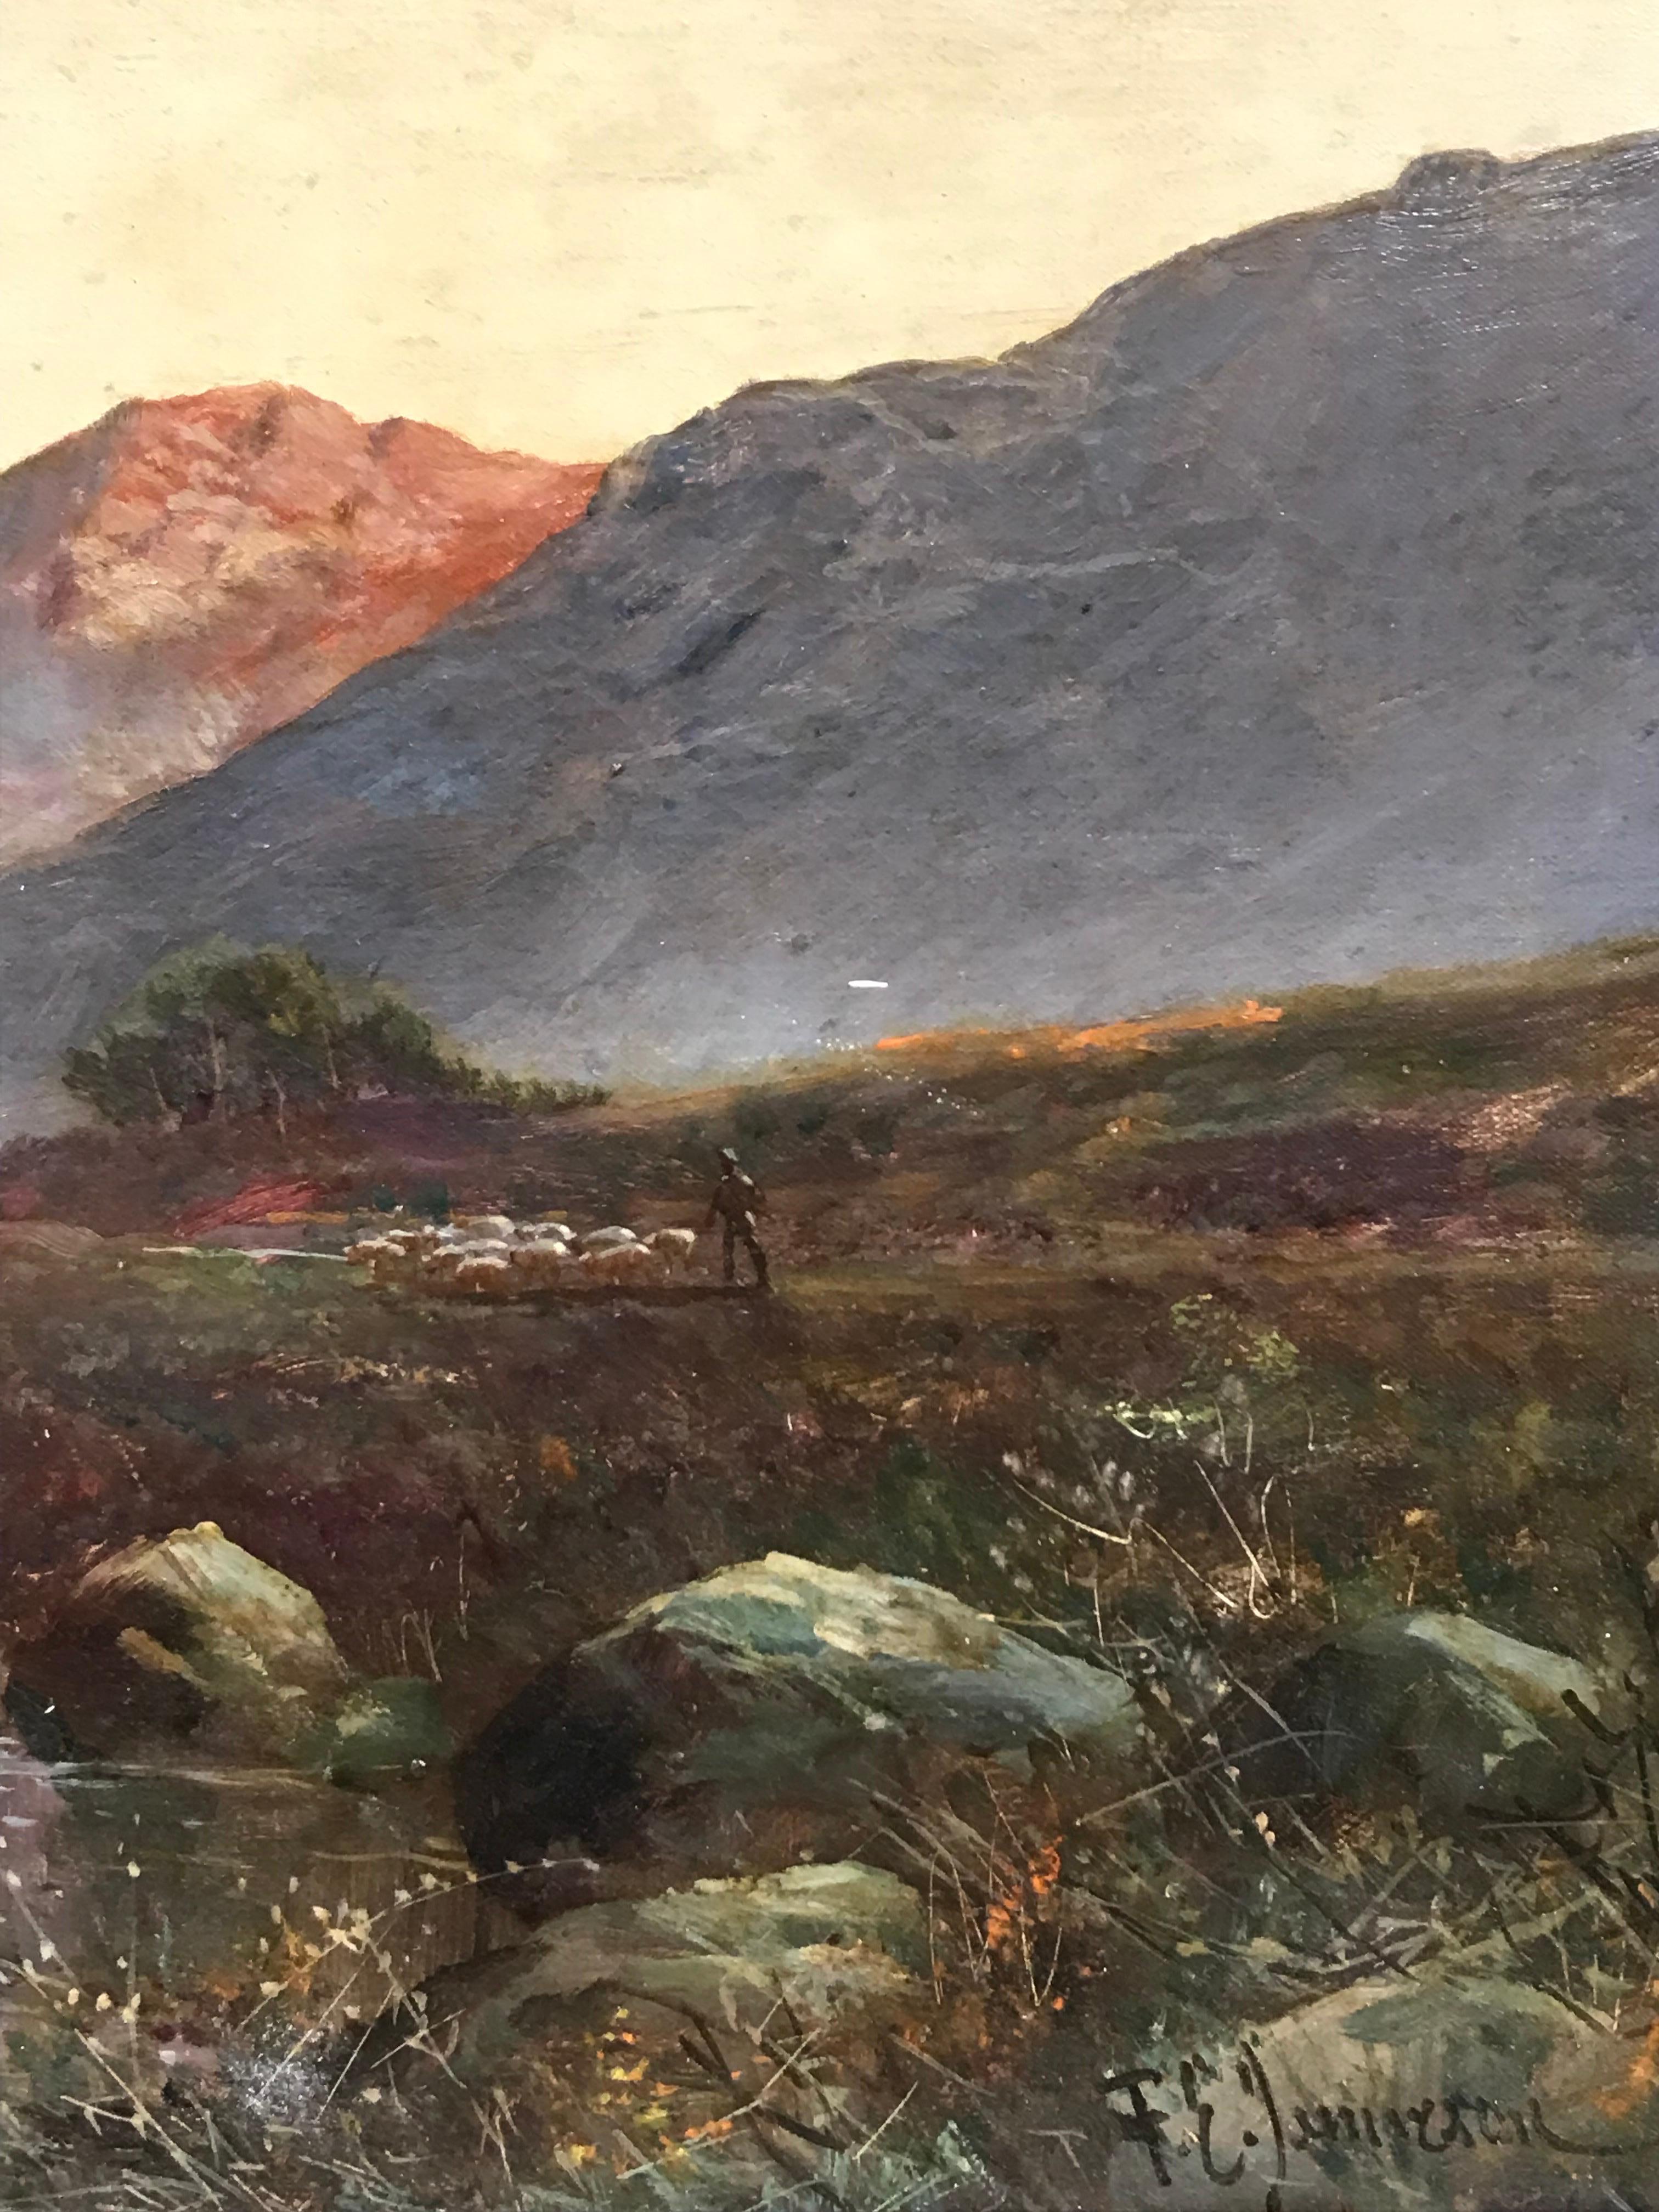 Antique Scottish Highlands Cottage in Mountain Glen at Sunset, signed oil  - Brown Landscape Painting by Francis E. Jamieson